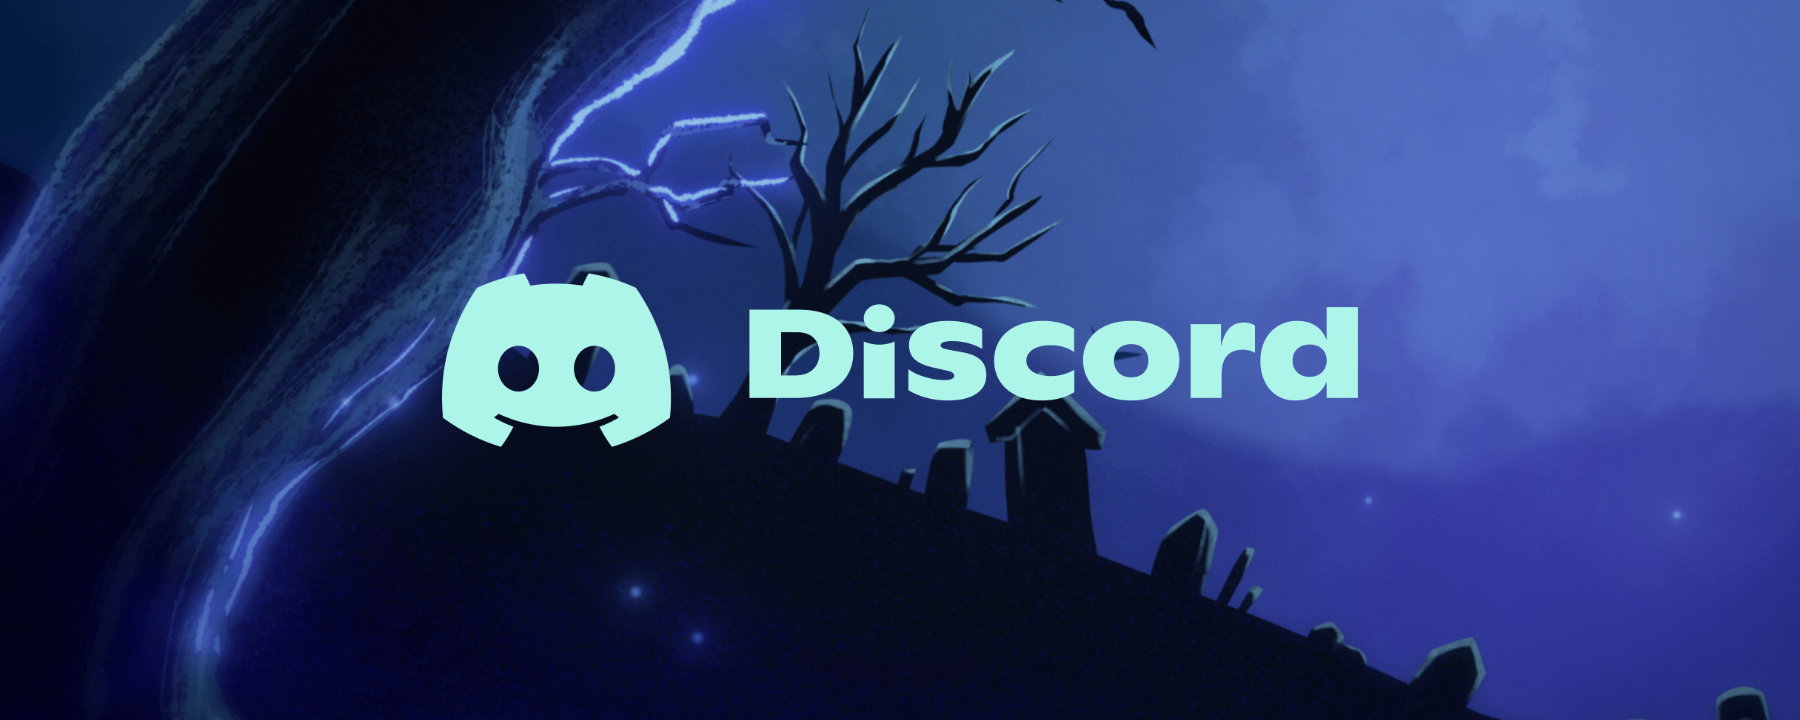 The Discord logo in front of a nighttime graveyard background. 